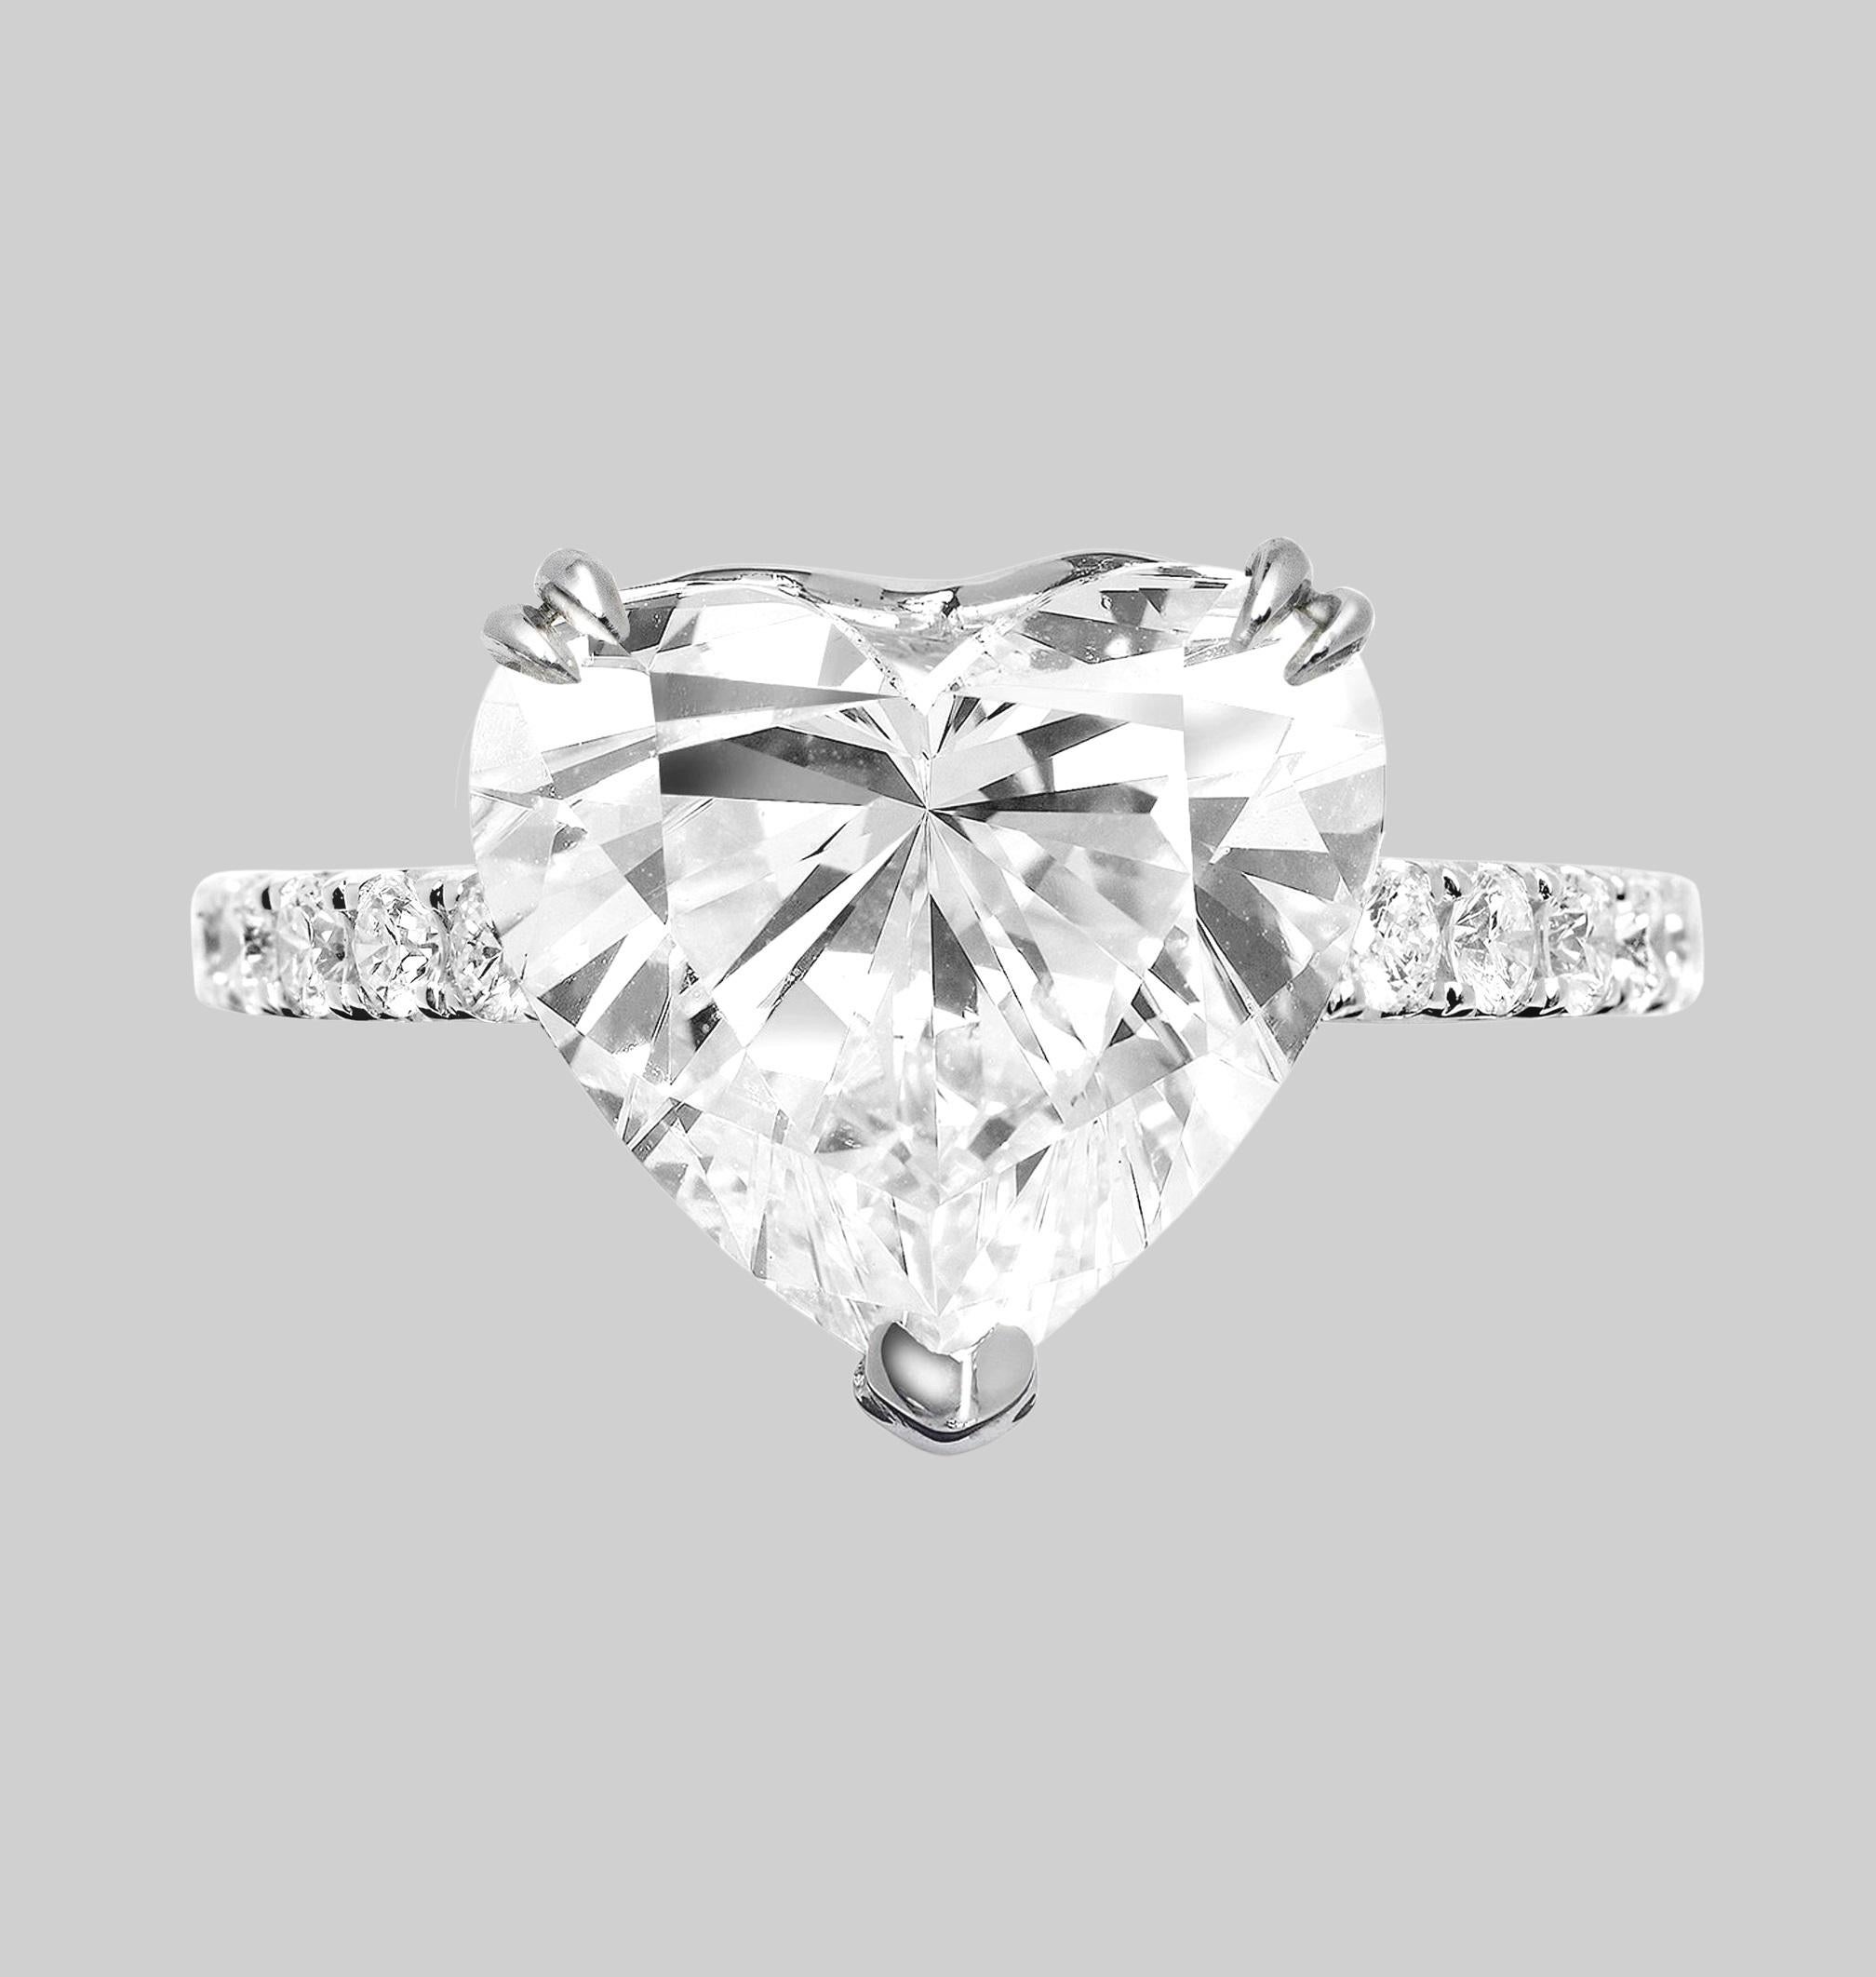 An exquisite GIA certified 3 carat diamond with internally flawless clarity the highest grade of pureness and e color practically the best you can get.


Diamonds like this are considered for investment purposes